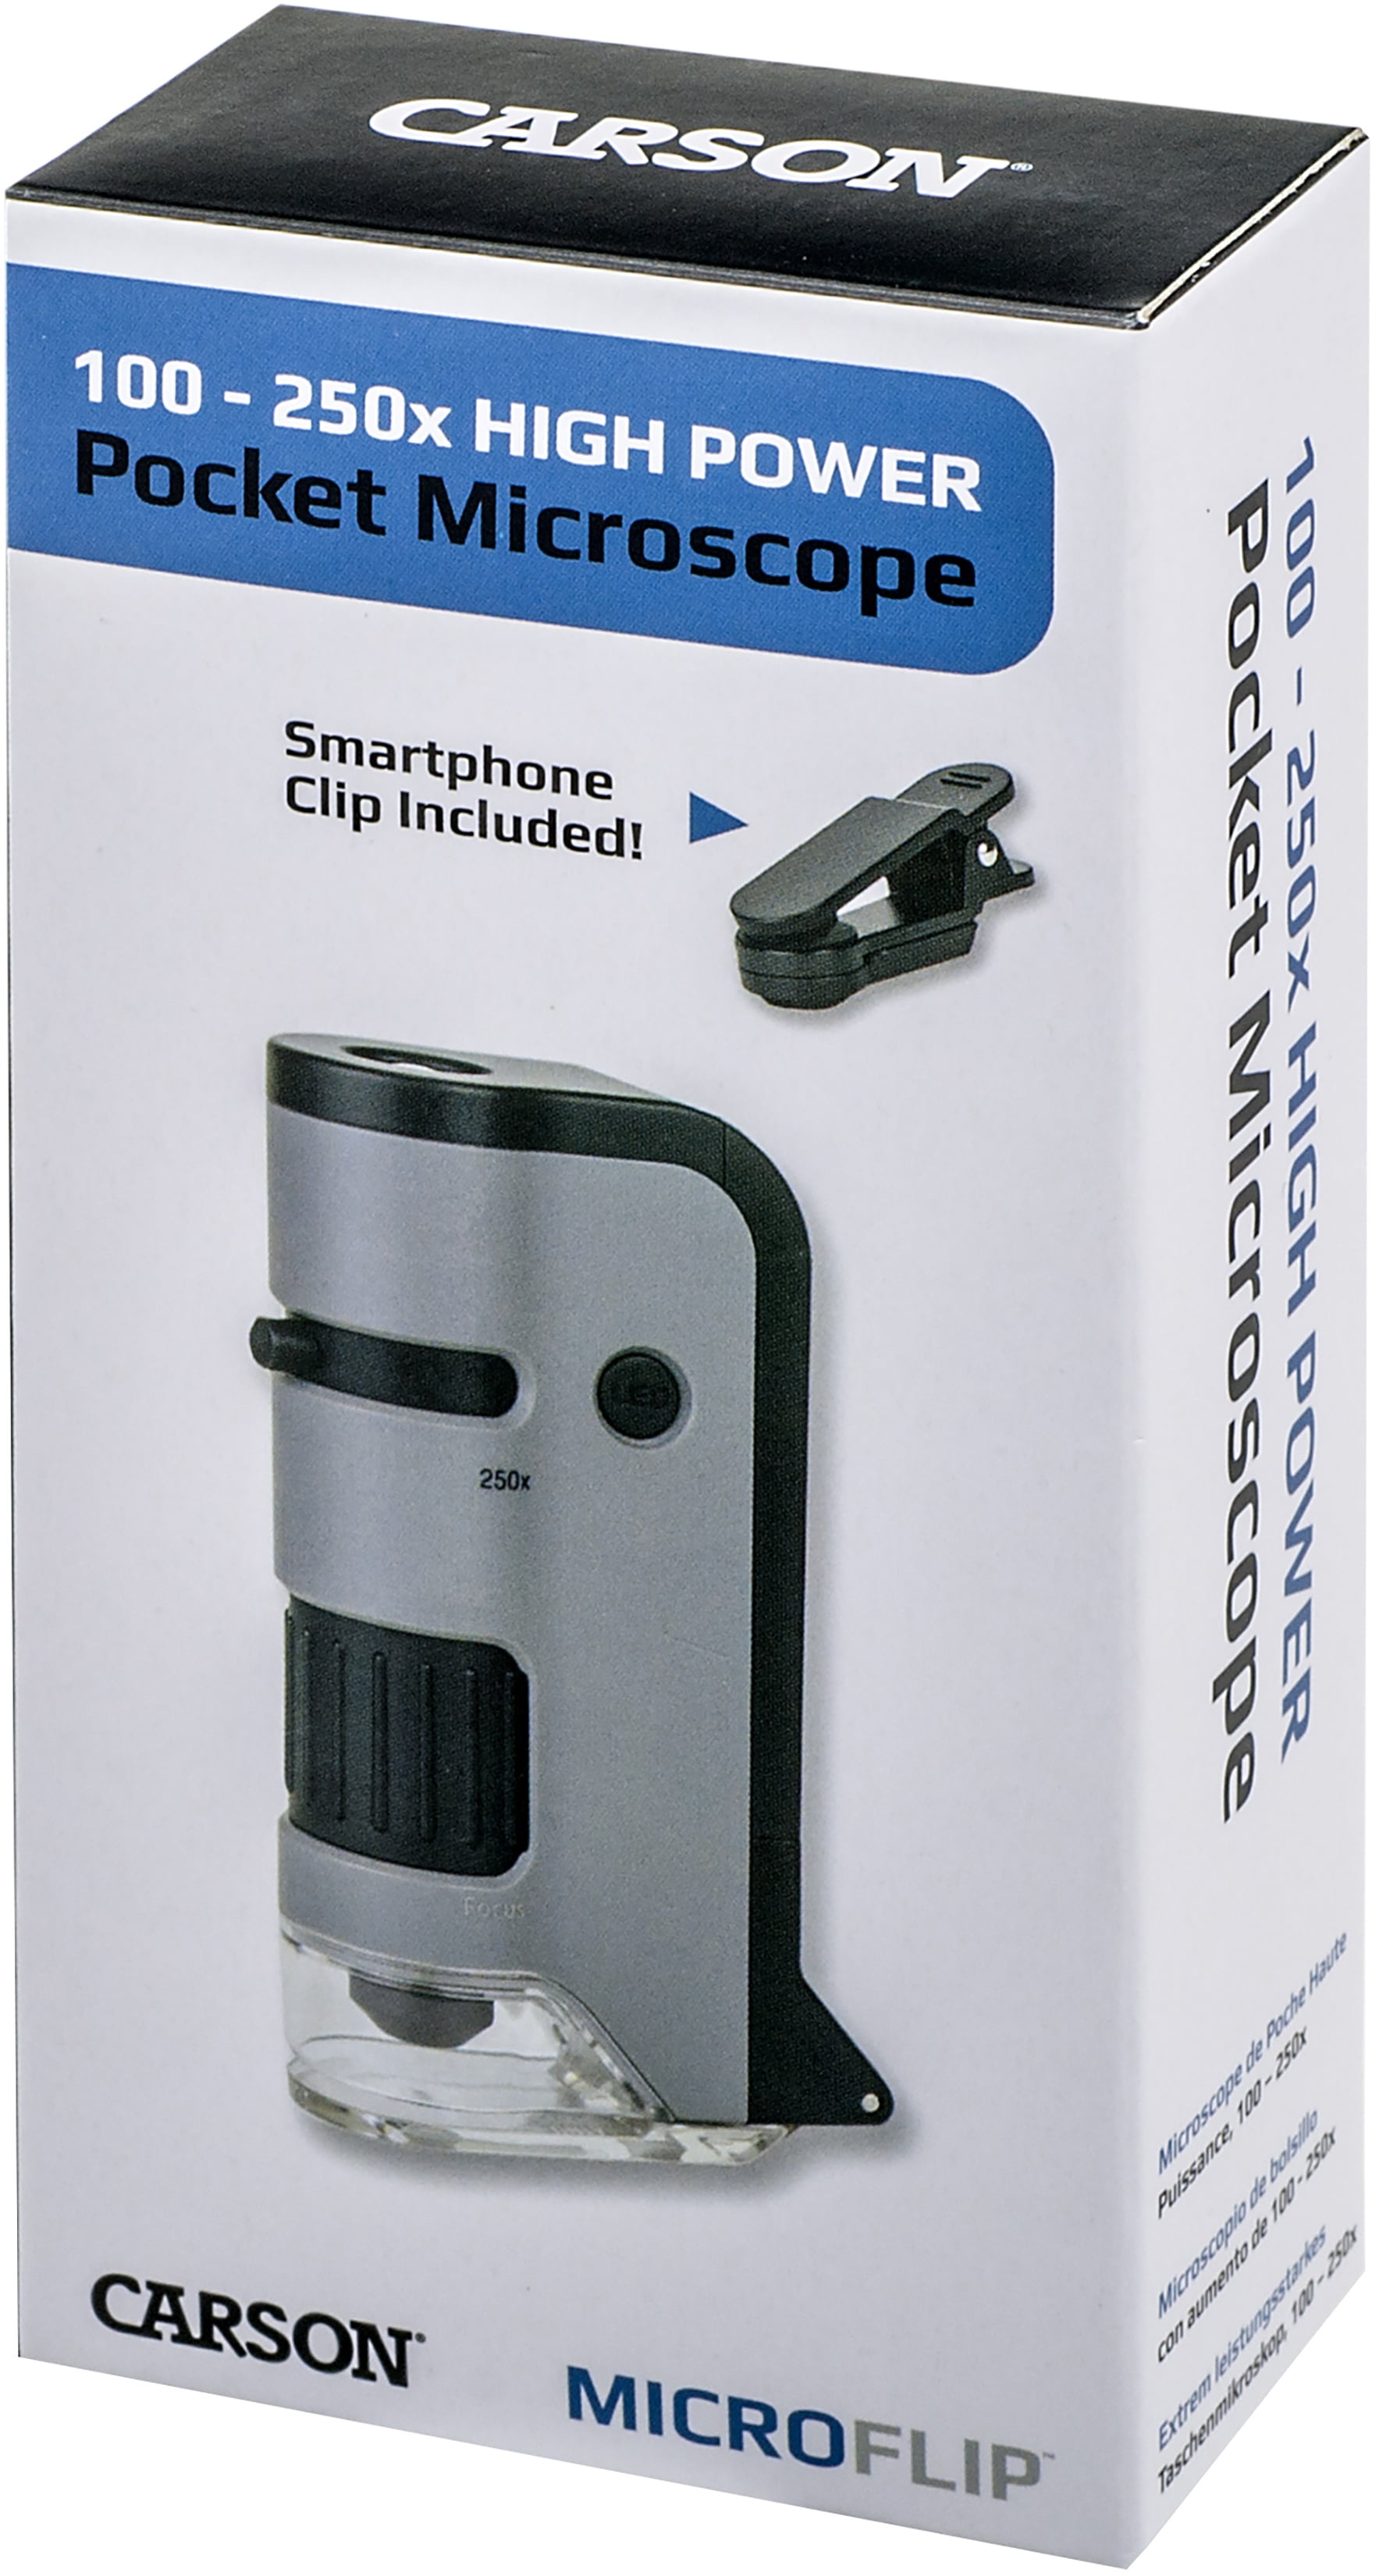 Carson MicroFlip 100x-250x LED and UV Lighted Pocket Microscope with Flip Down Slide Base and Smartphone Digiscoping Clip MP-250 or MP-250MU 